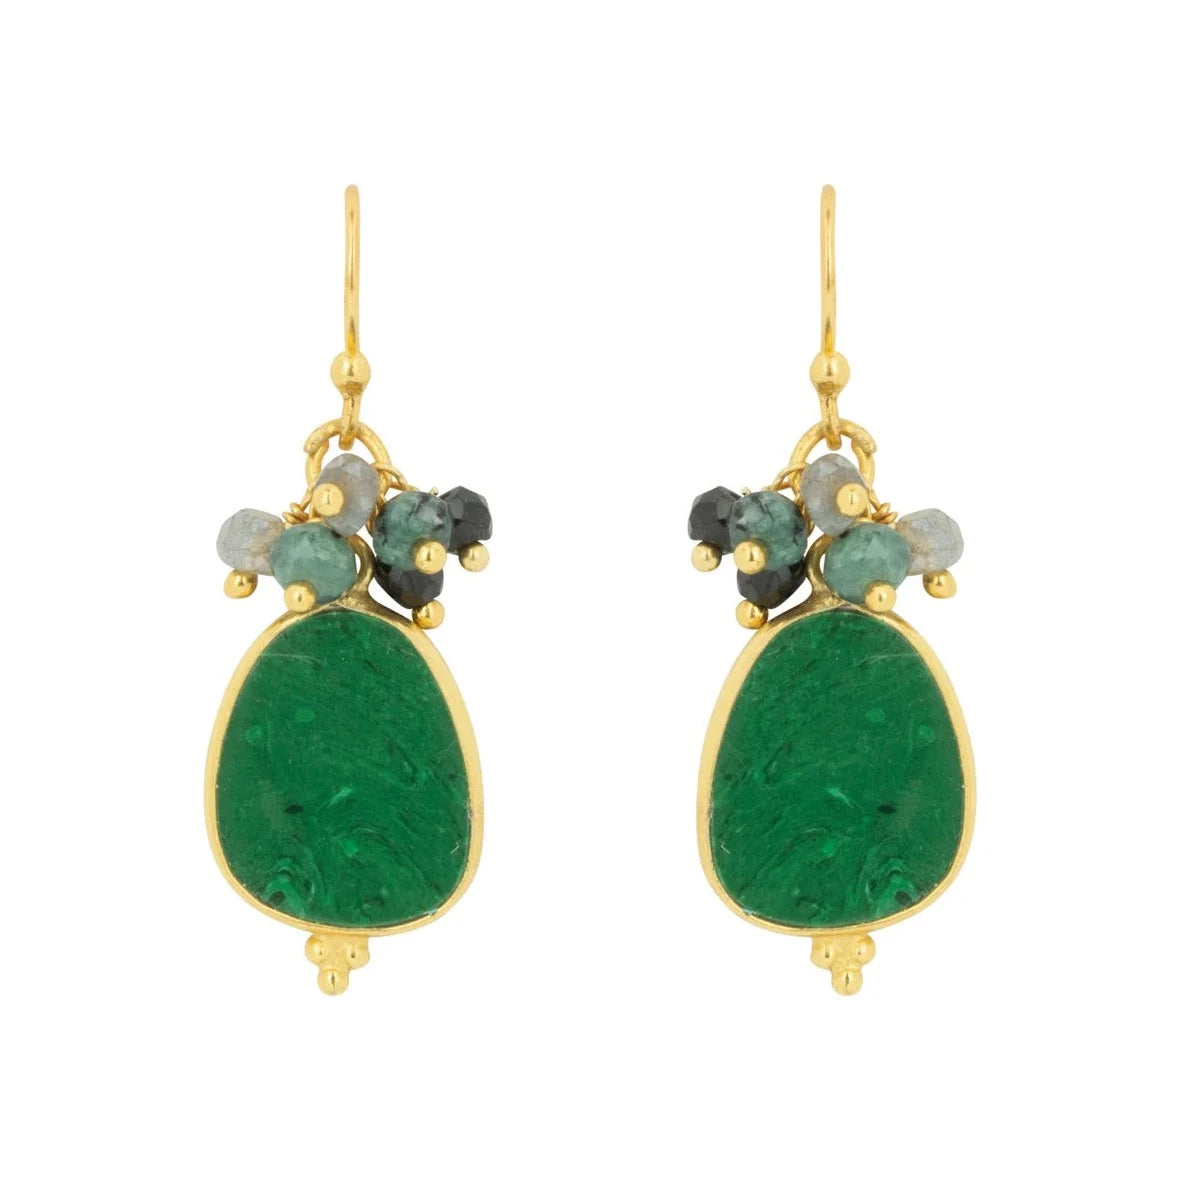 The Willow Green Earrings, from Mazzi D Fiori, &nbsp;feature a captivating blend of natural elements that reflect the enchanting textures found in the forest. Made with a malachite pendant and various gemstone beads set in 22K gold plating on brass, the metals and gemstones speak for themselves. Pair with the coordinating Willow Green Necklace for a natural and earthy aesthetic.